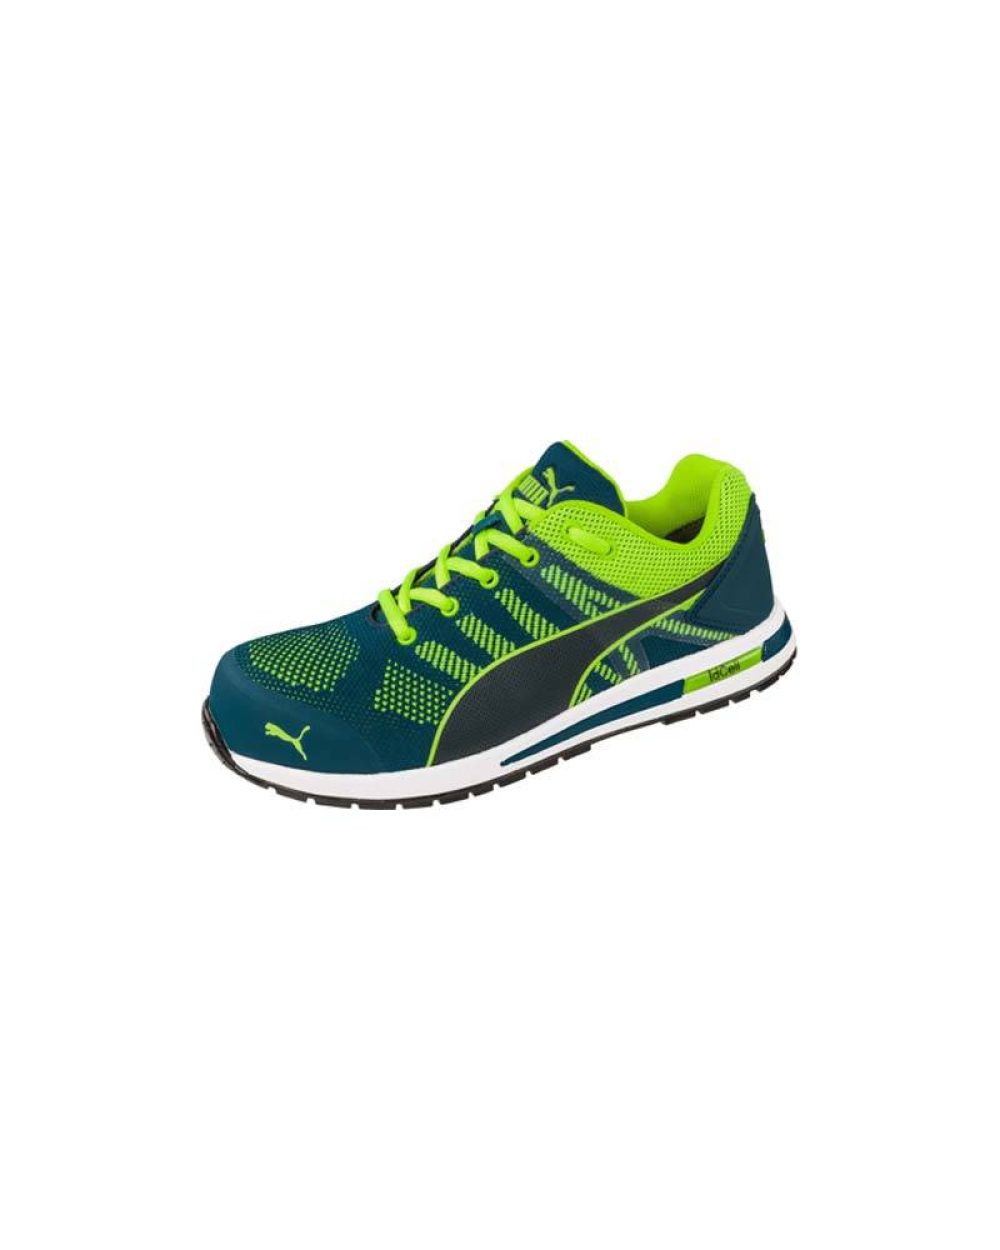 puma-arbeitsschuh-643170_elevate_knit_green_low_single